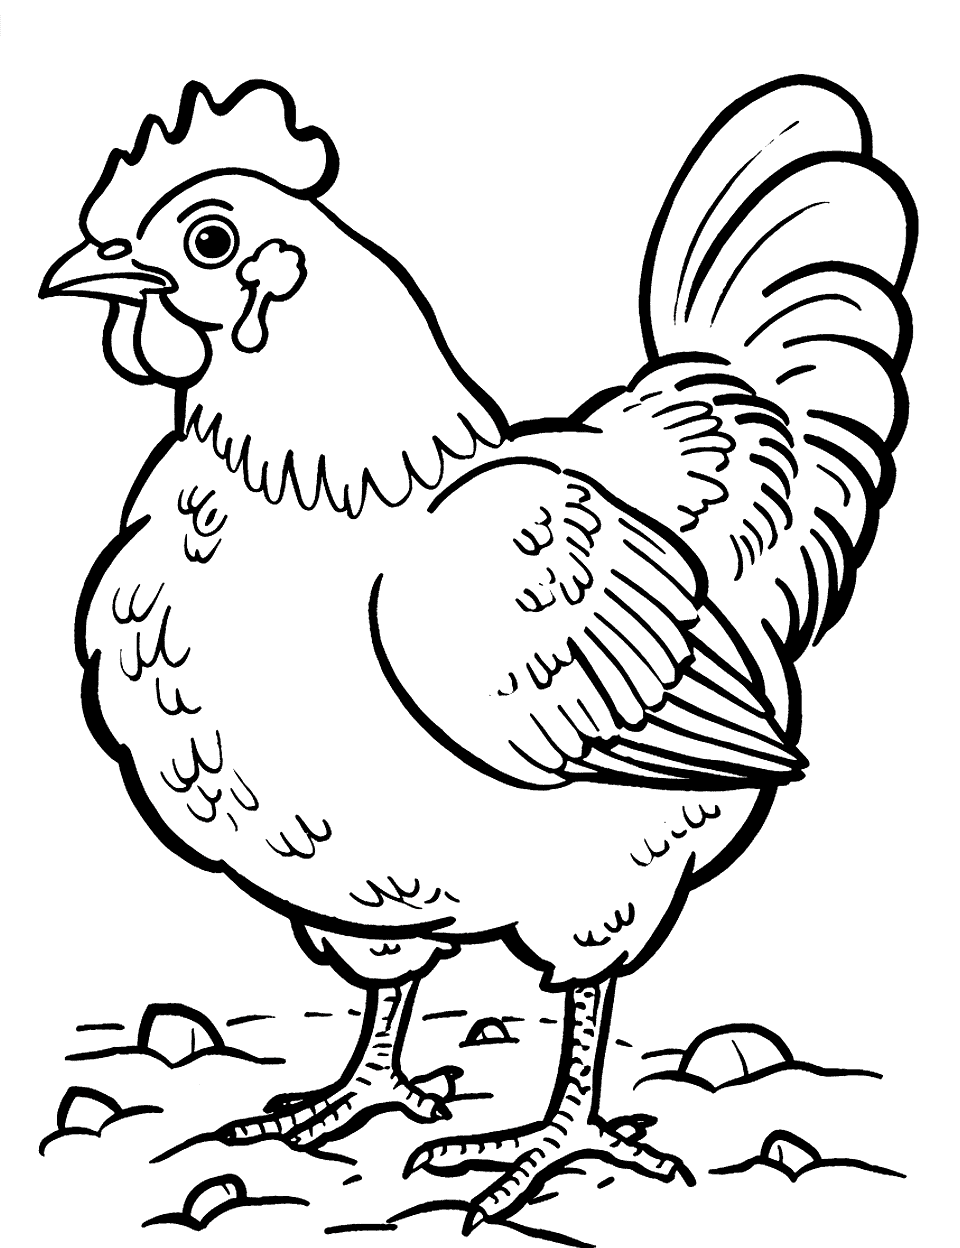 Simple Chicken Scene Coloring Page - A simple scene of a chicken standing on dirt for easy coloring.